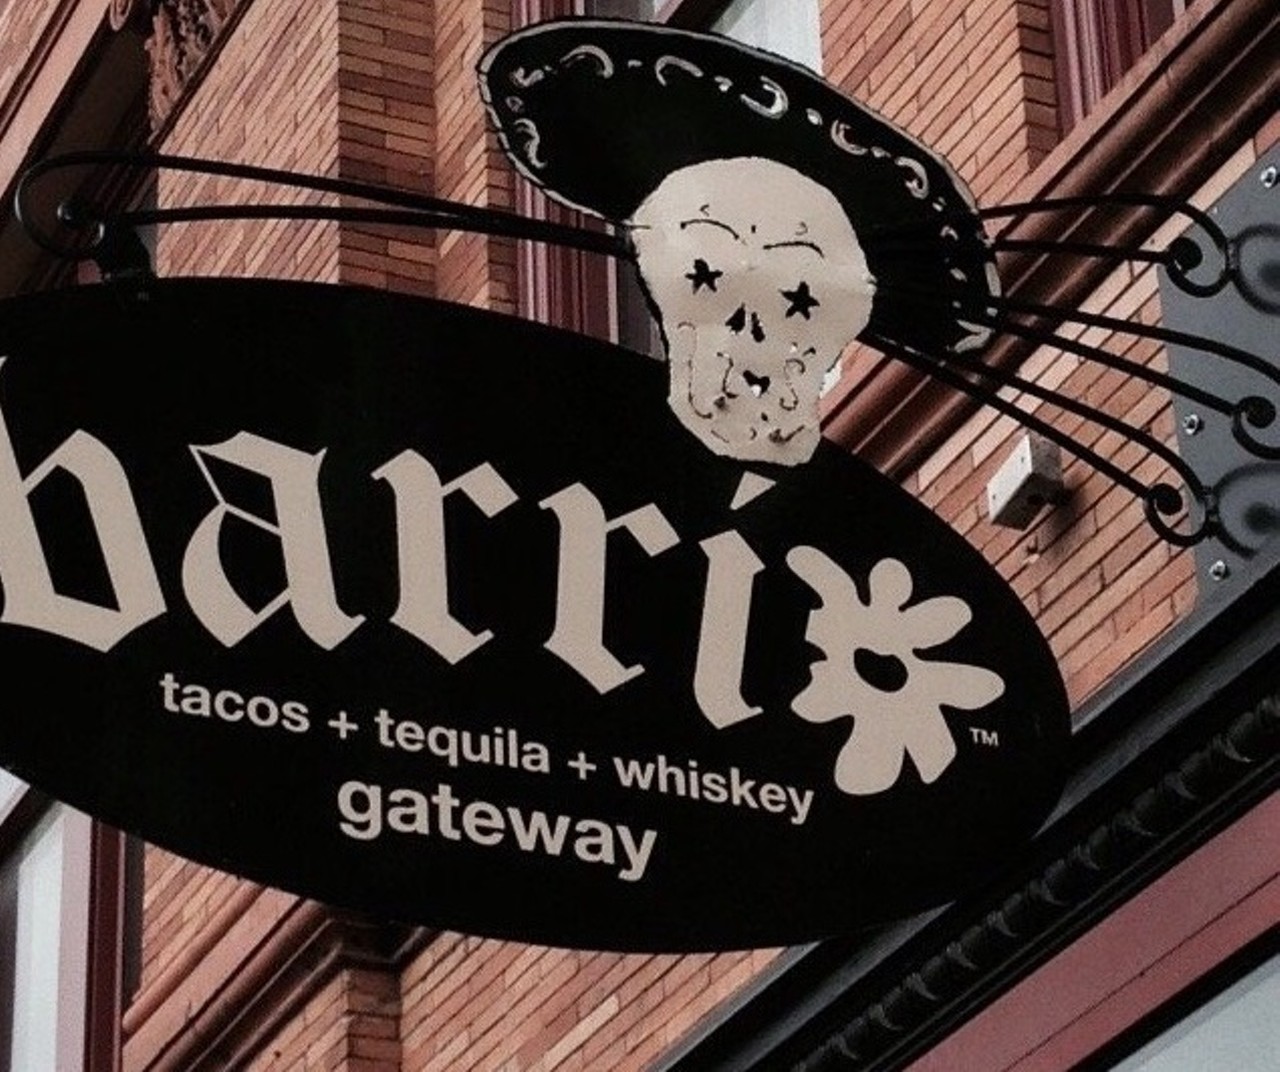  Barrio
Barrio arrived in Tremont in 2009 and since then, has totally taken over the taco scene in Cleveland, and Clevelanders can't get enough. 
Photo via Scene Archives